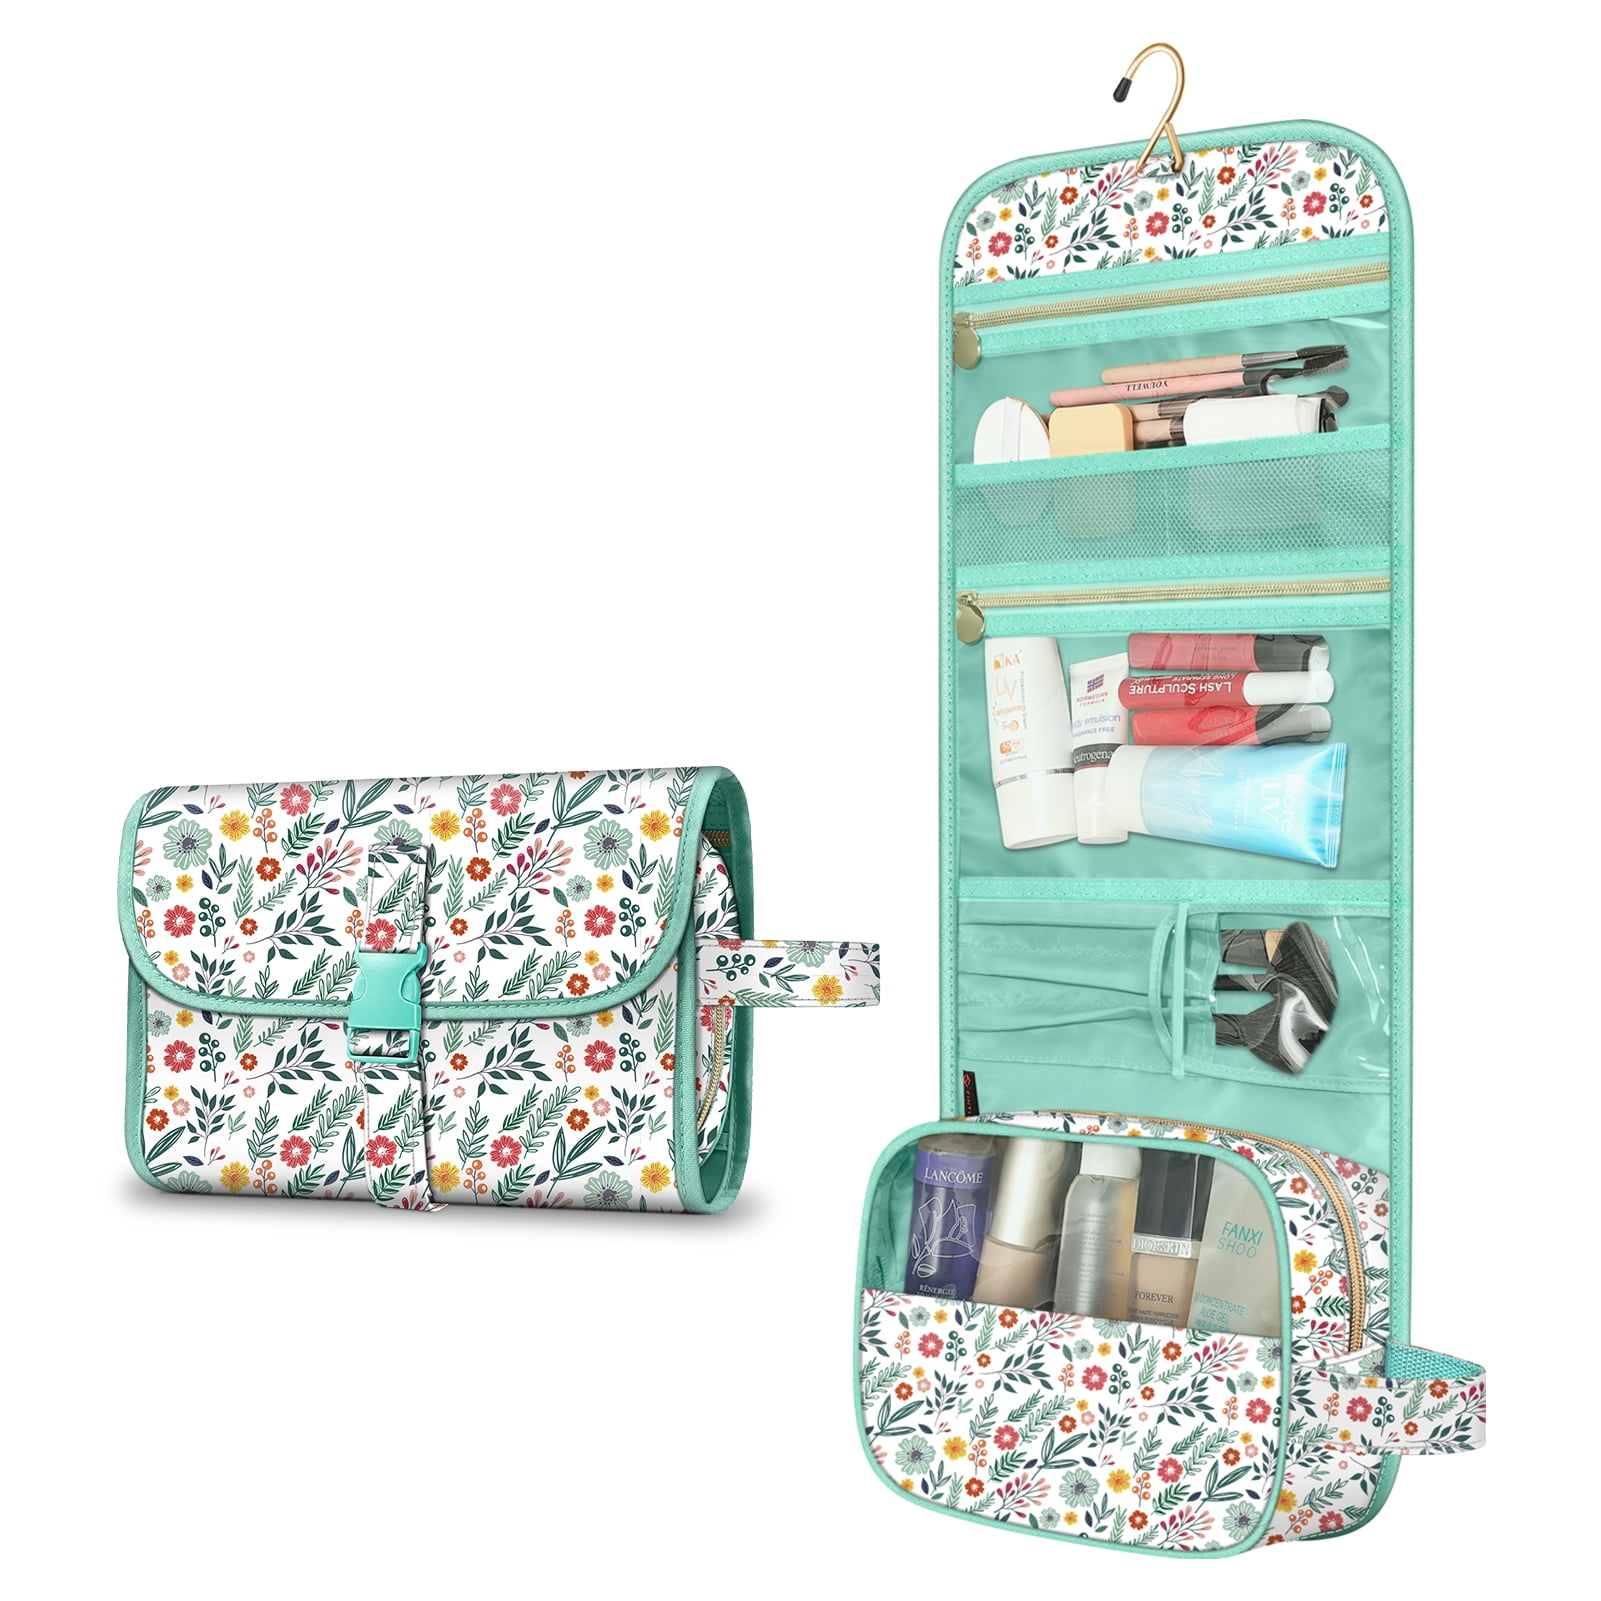 New Women's Travel Storage Bags Fashion Contracted Bag Organizer